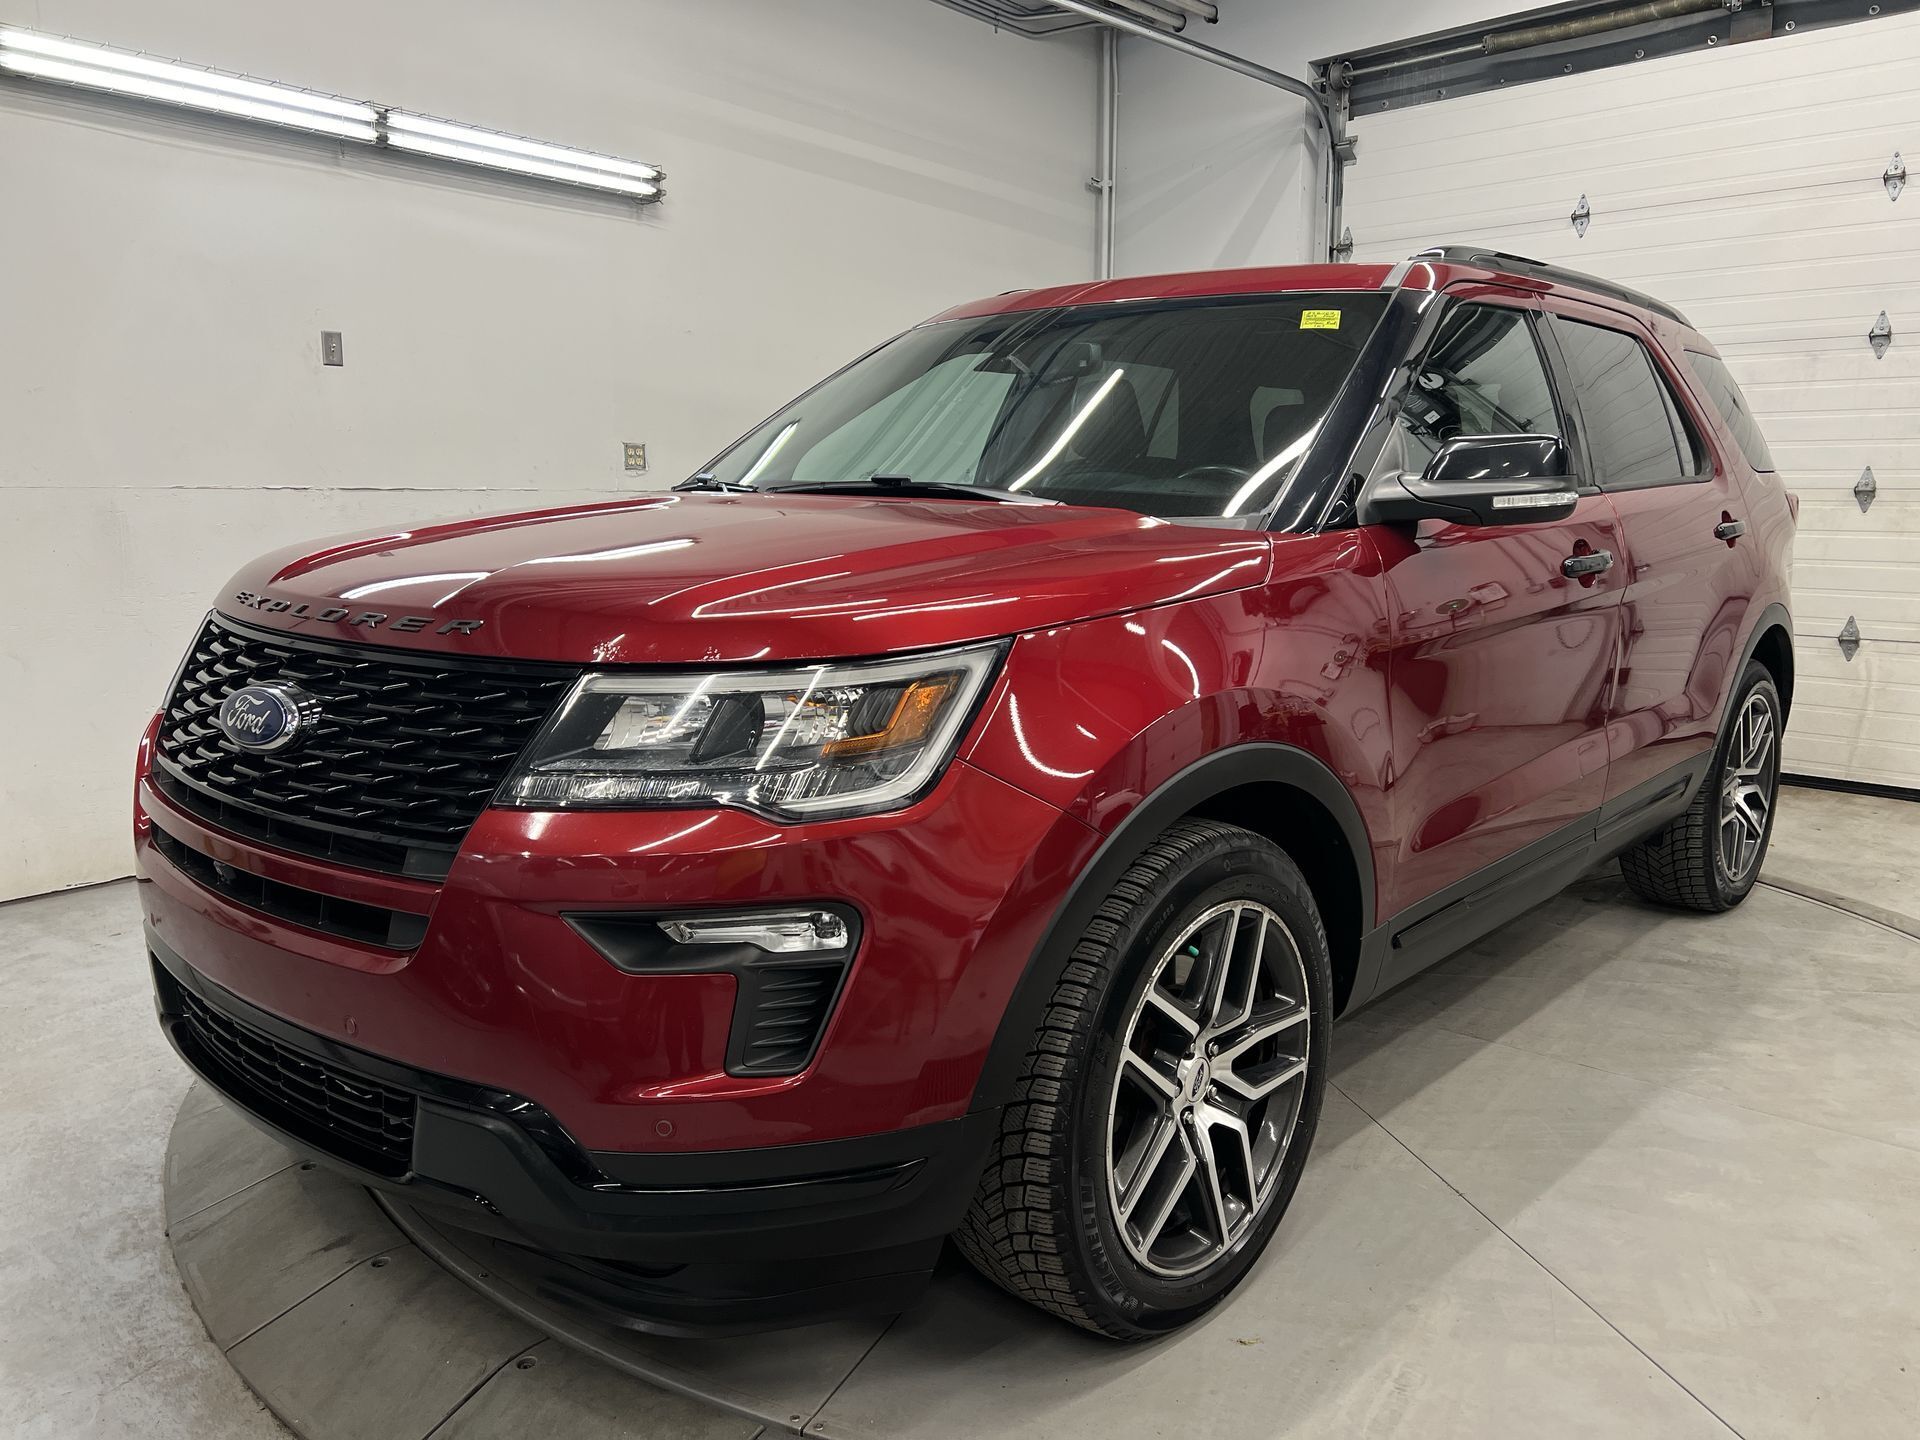 2019 Ford Explorer SPORT 4x4| 365HP | PANO ROOF |COOLED LEATHER | NAV